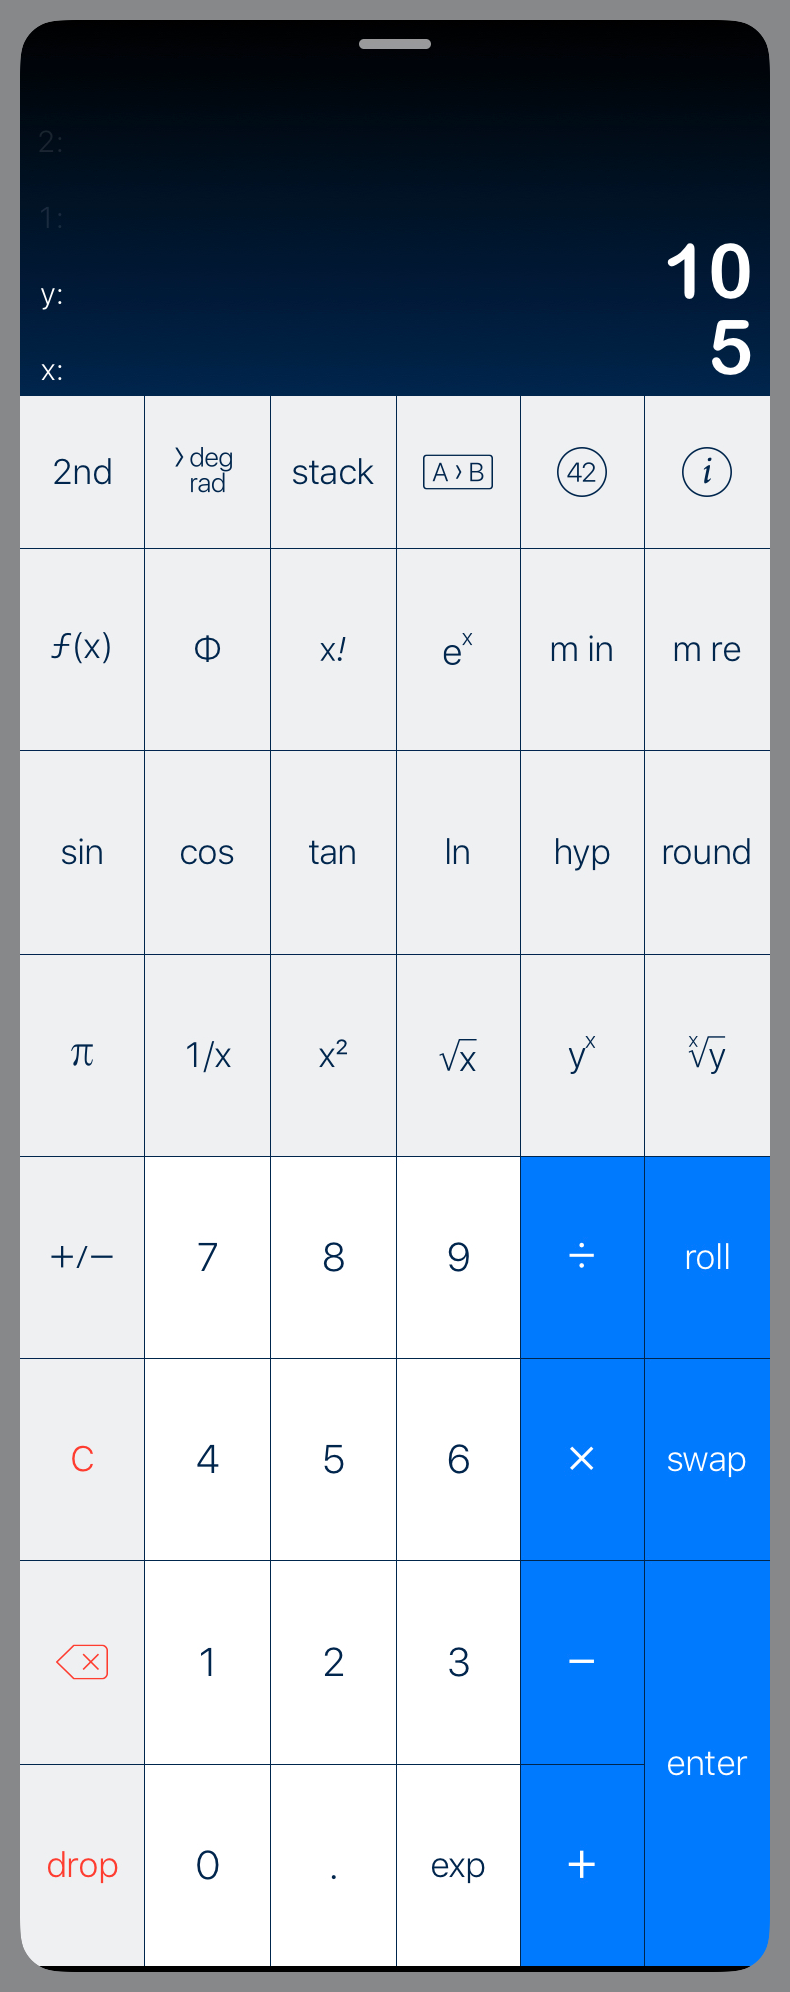 PCalc as Slide Over app